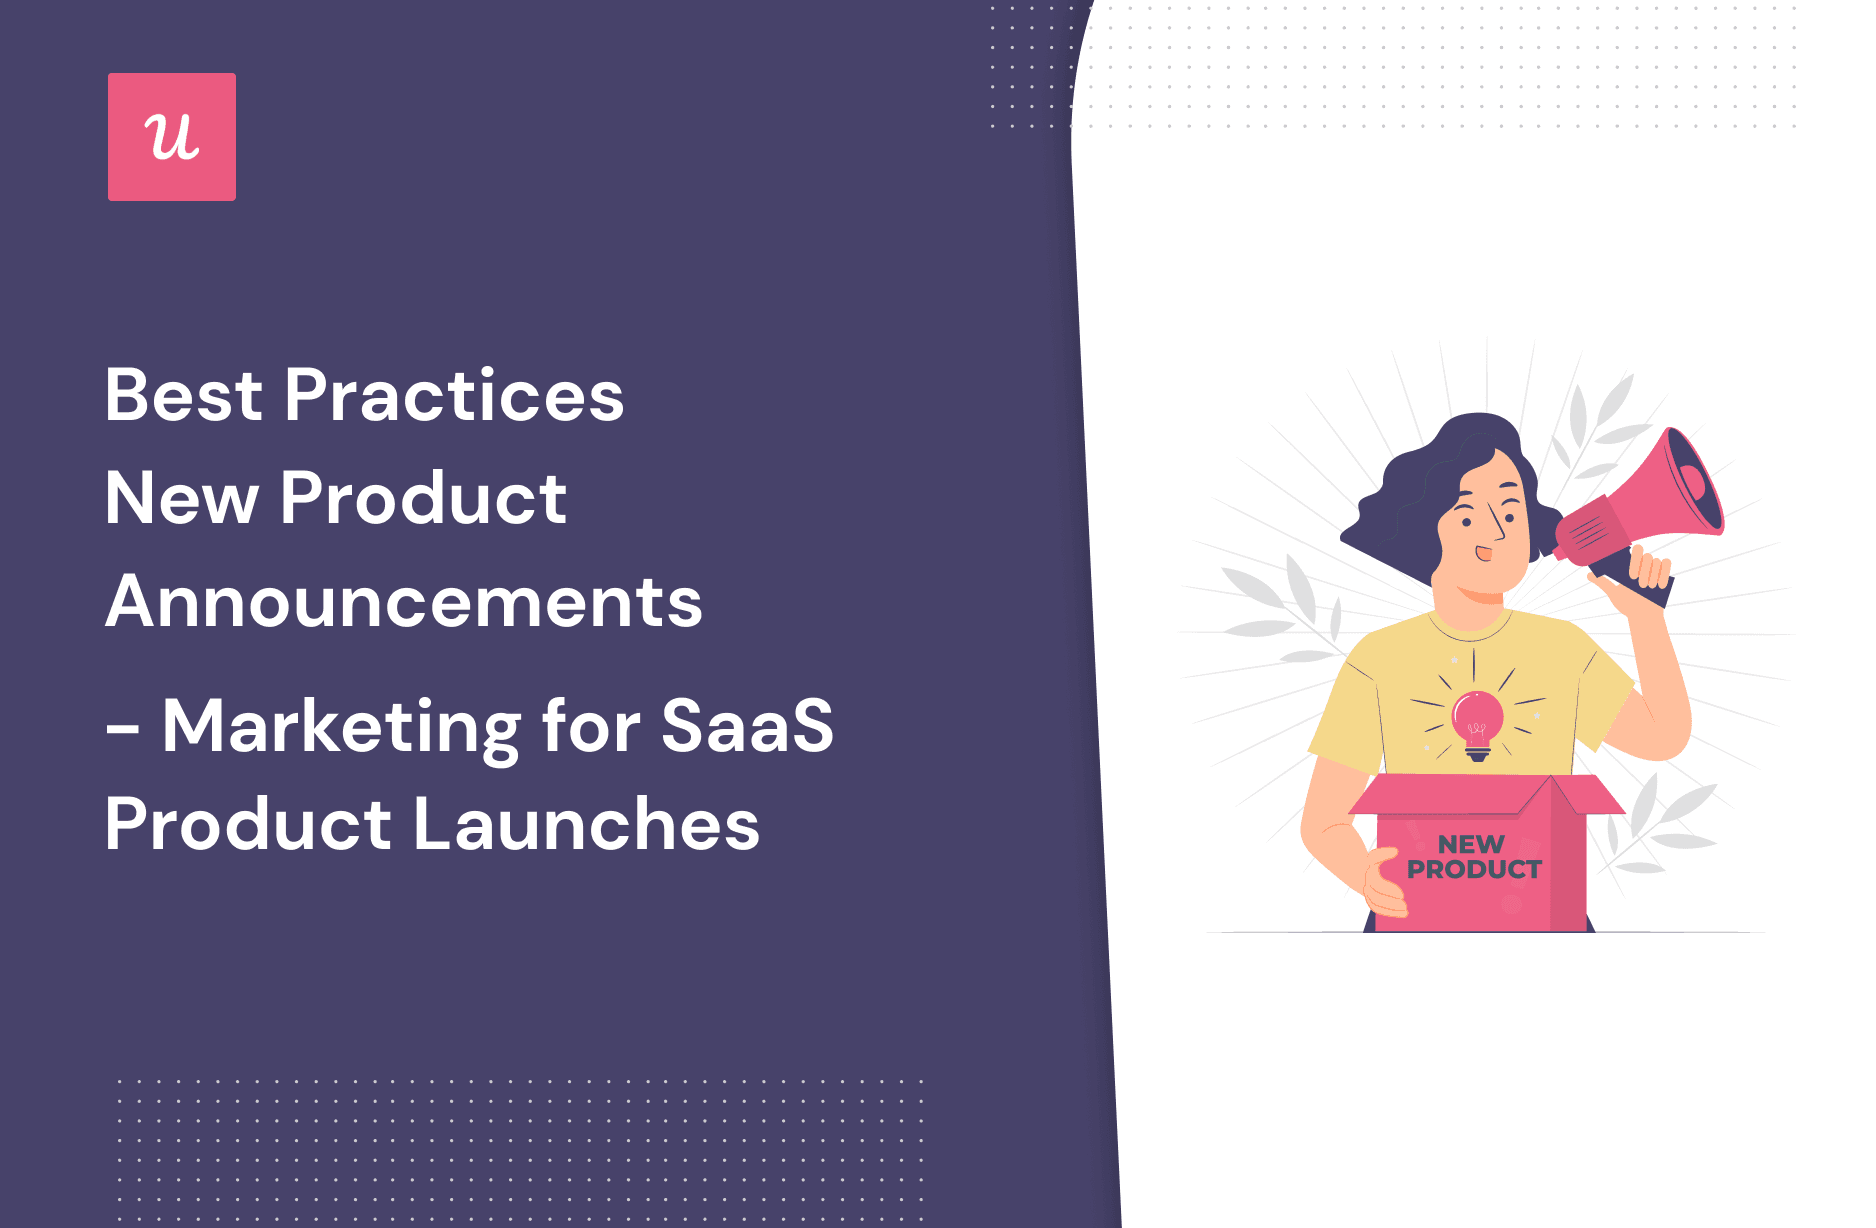 Best Practices New Product Announcements - Marketing For SaaS Product Launches